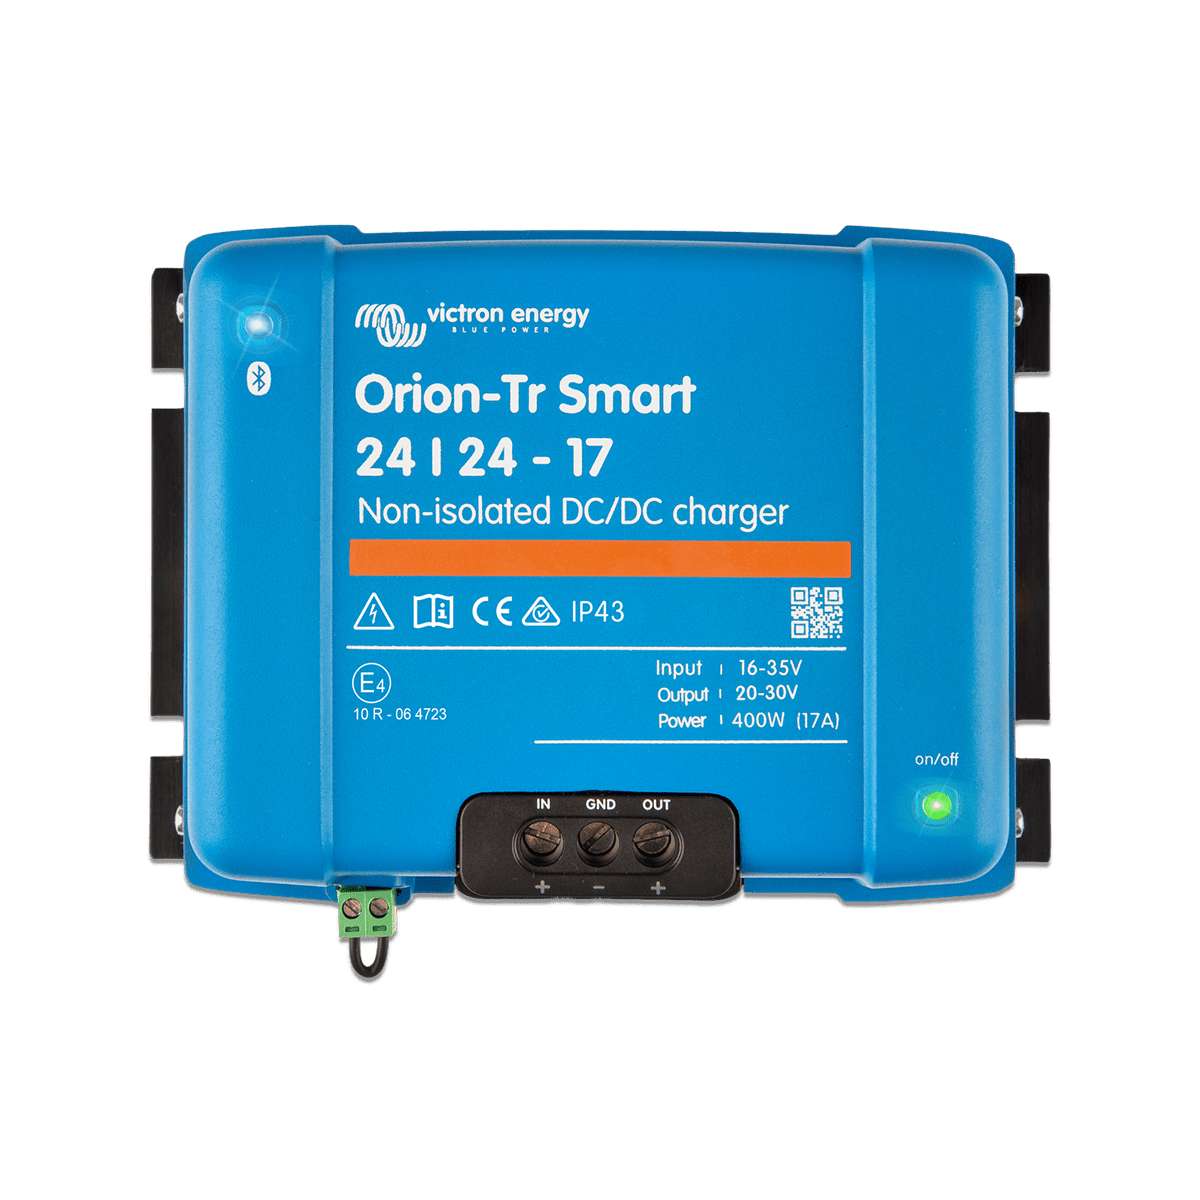 Chargeur DC/DC Orion Smart 24V|24V 17A (400W) non isolé - Pharos Energies